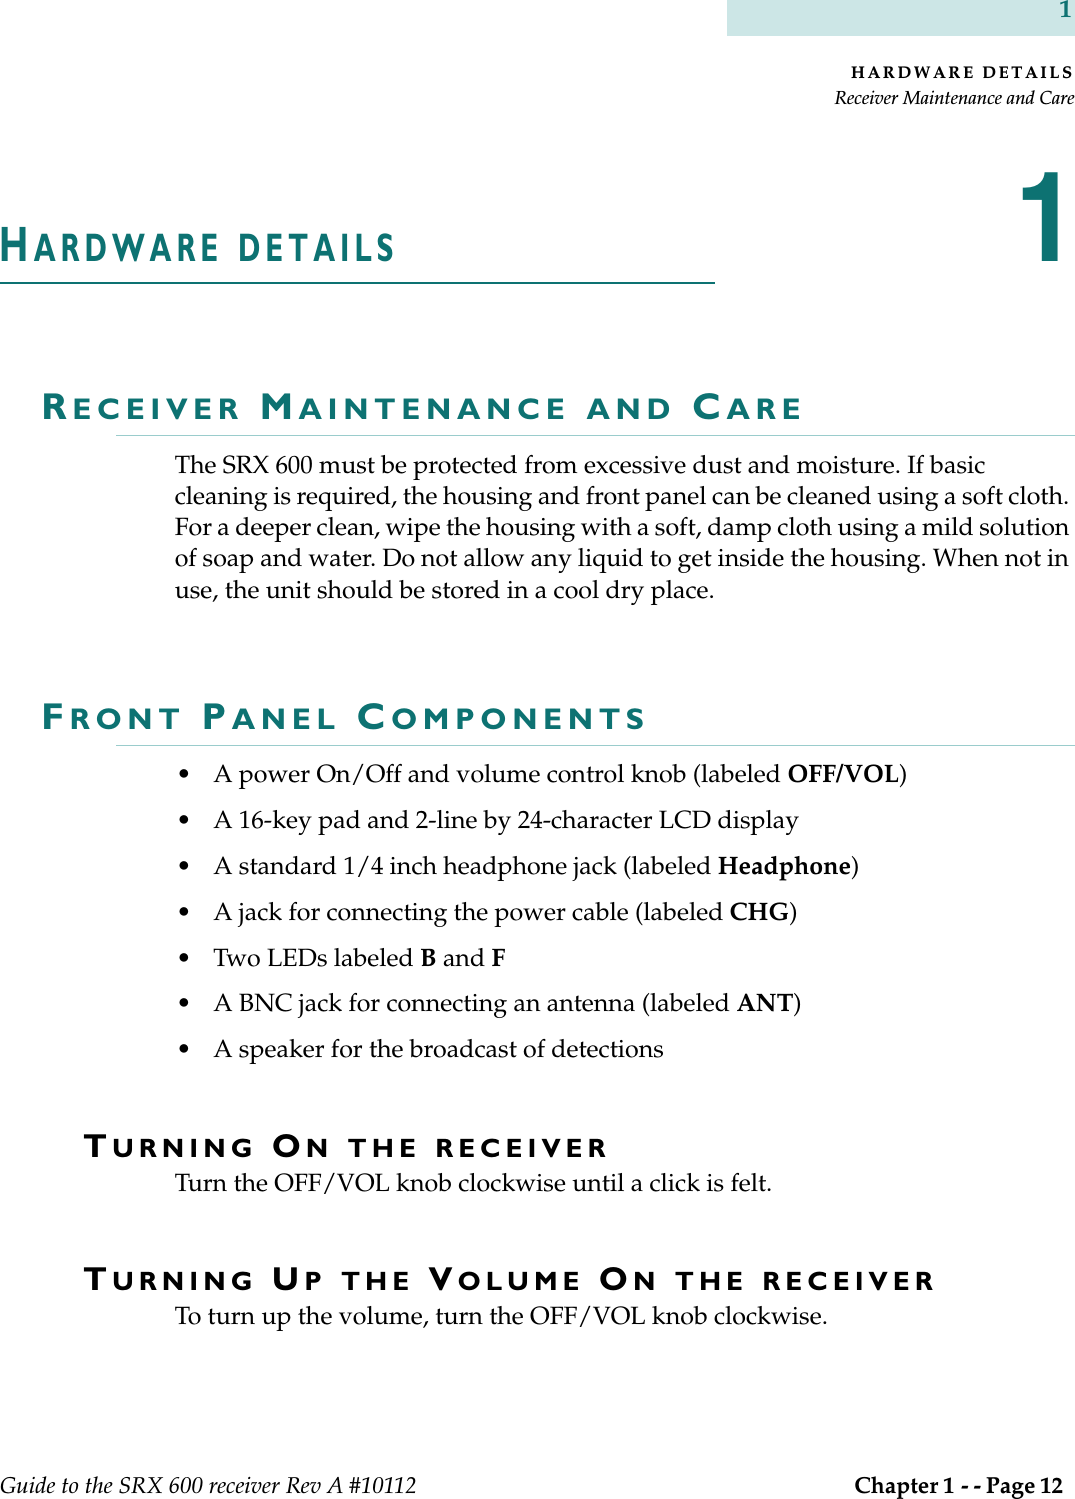 HARDWARE DETAILSReceiver Maintenance and CareGuide to the SRX 600 receiver Rev A #10112  Chapter 1 - - Page 12 1HARDWARE DETAILS1RECEIVER MAINTENANCE AND CAREThe SRX 600 must be protected from excessive dust and moisture. If basic cleaning is required, the housing and front panel can be cleaned using a soft cloth. For a deeper clean, wipe the housing with a soft, damp cloth using a mild solution of soap and water. Do not allow any liquid to get inside the housing. When not in use, the unit should be stored in a cool dry place. FRONT PANEL COMPONENTS• A power On/Off and volume control knob (labeled OFF/VOL)• A 16-key pad and 2-line by 24-character LCD display • A standard 1/4 inch headphone jack (labeled Headphone)• A jack for connecting the power cable (labeled CHG)• Two LEDs labeled B and F• A BNC jack for connecting an antenna (labeled ANT)• A speaker for the broadcast of detections TURNING ON THE RECEIVERTurn the OFF/VOL knob clockwise until a click is felt. TURNING UP THE VOLUME ON THE RECEIVERTo turn up the volume, turn the OFF/VOL knob clockwise.